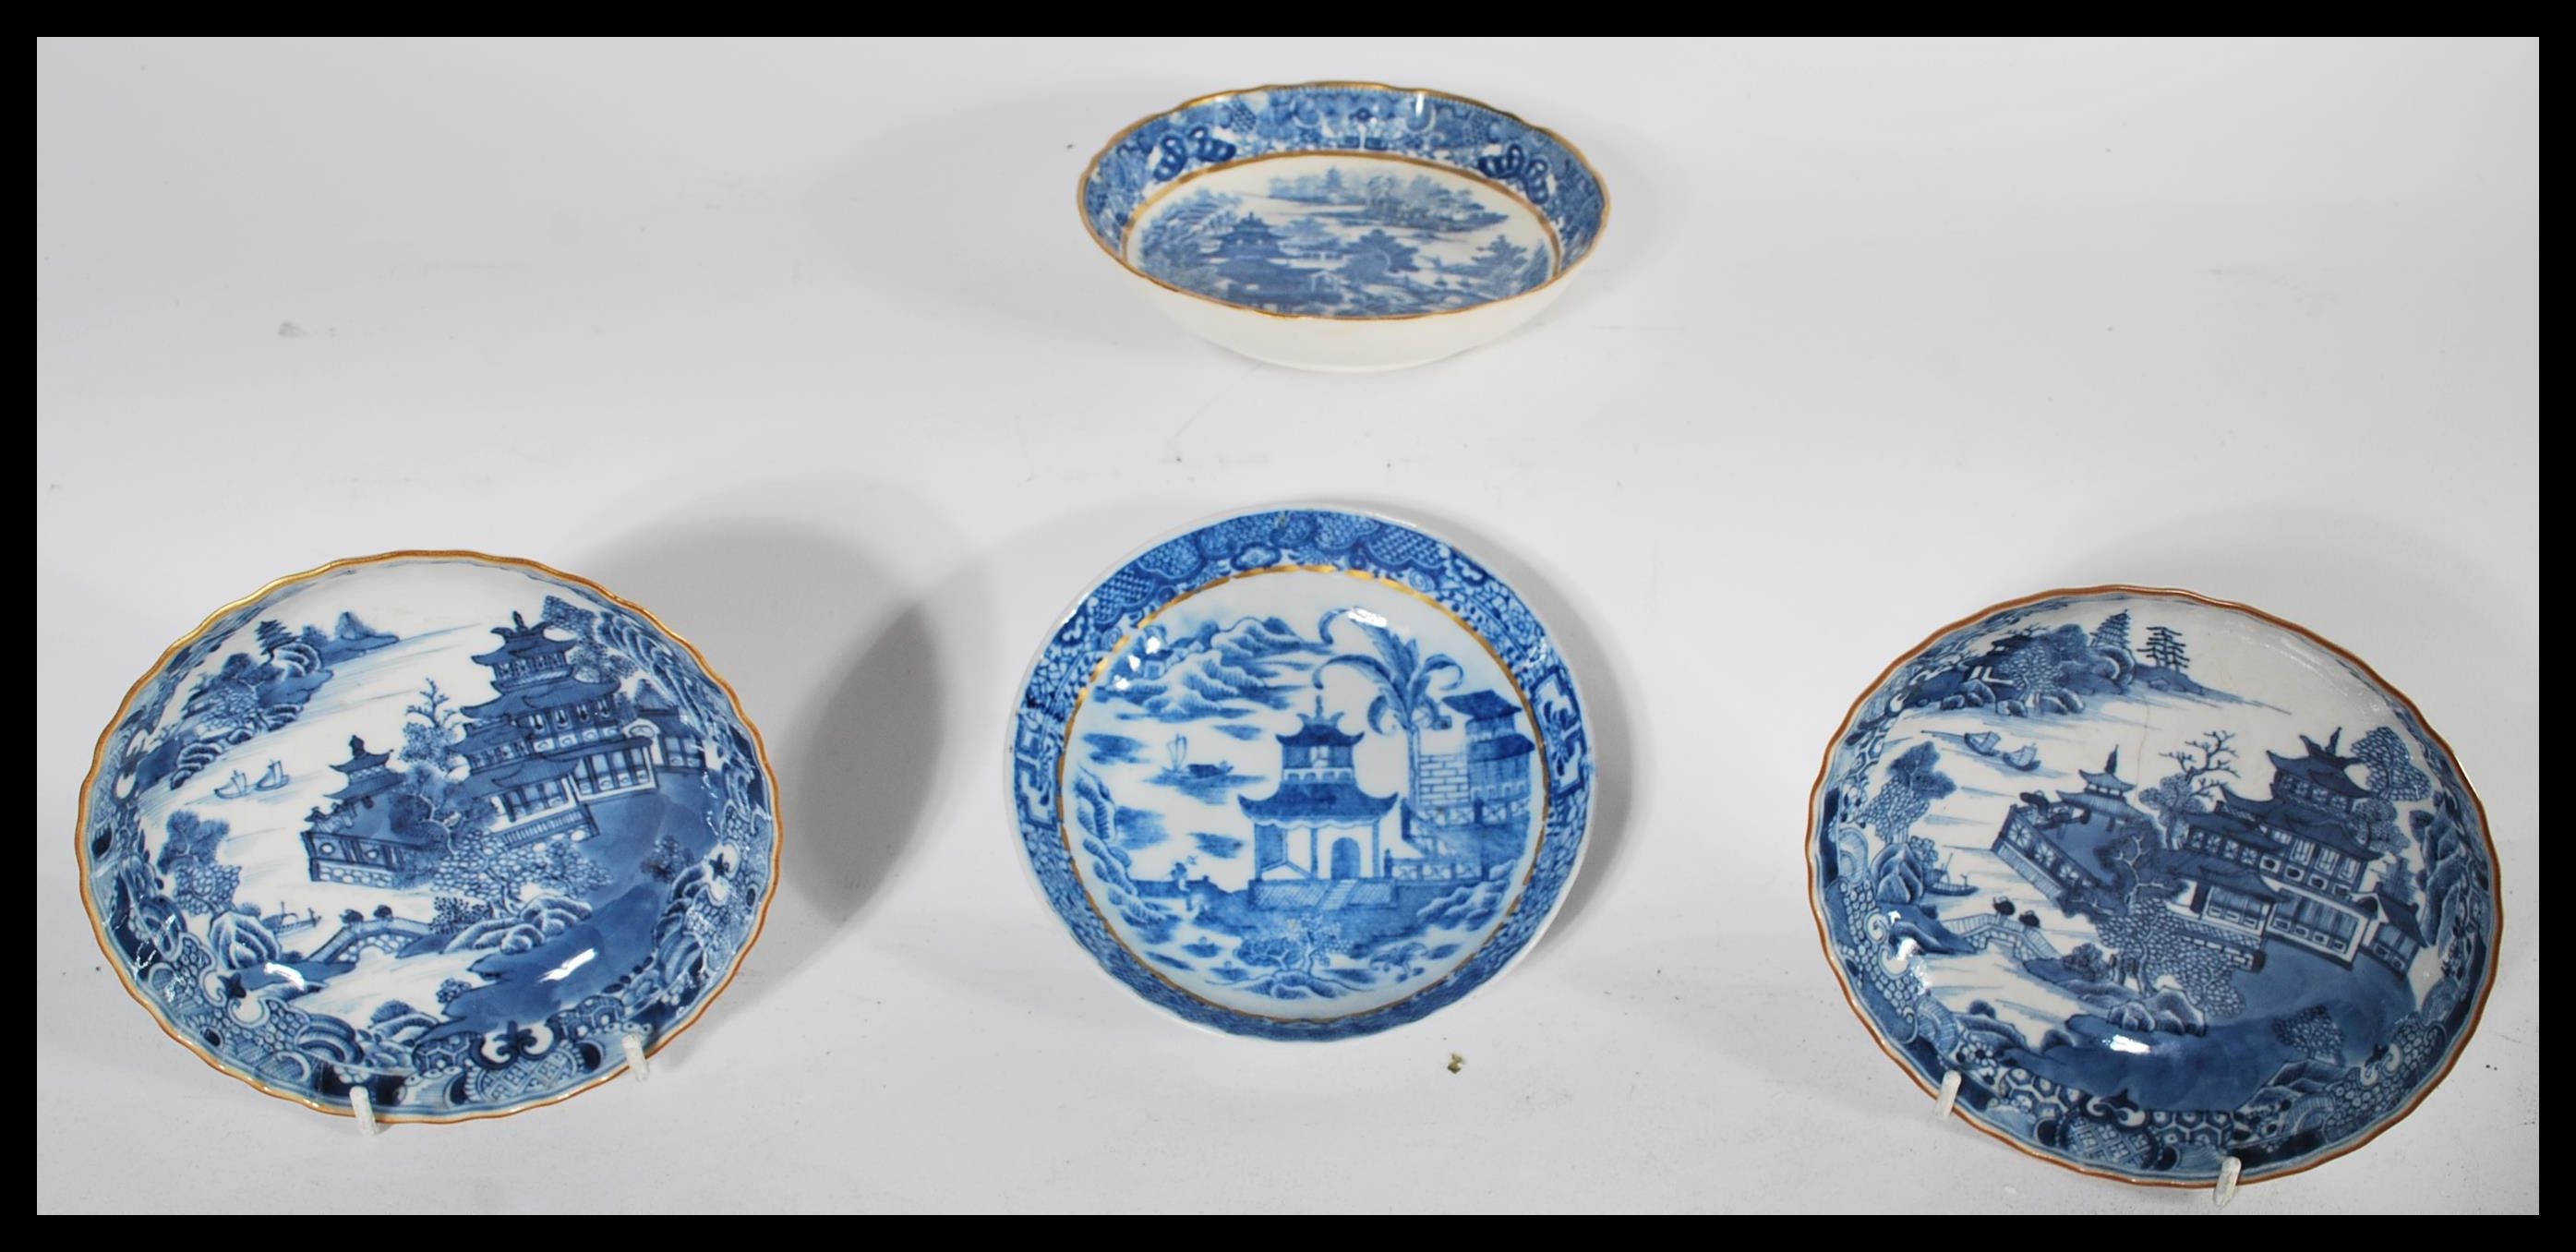 A group of four early English Factory most likely Worcester blue and white bowls / plates to include